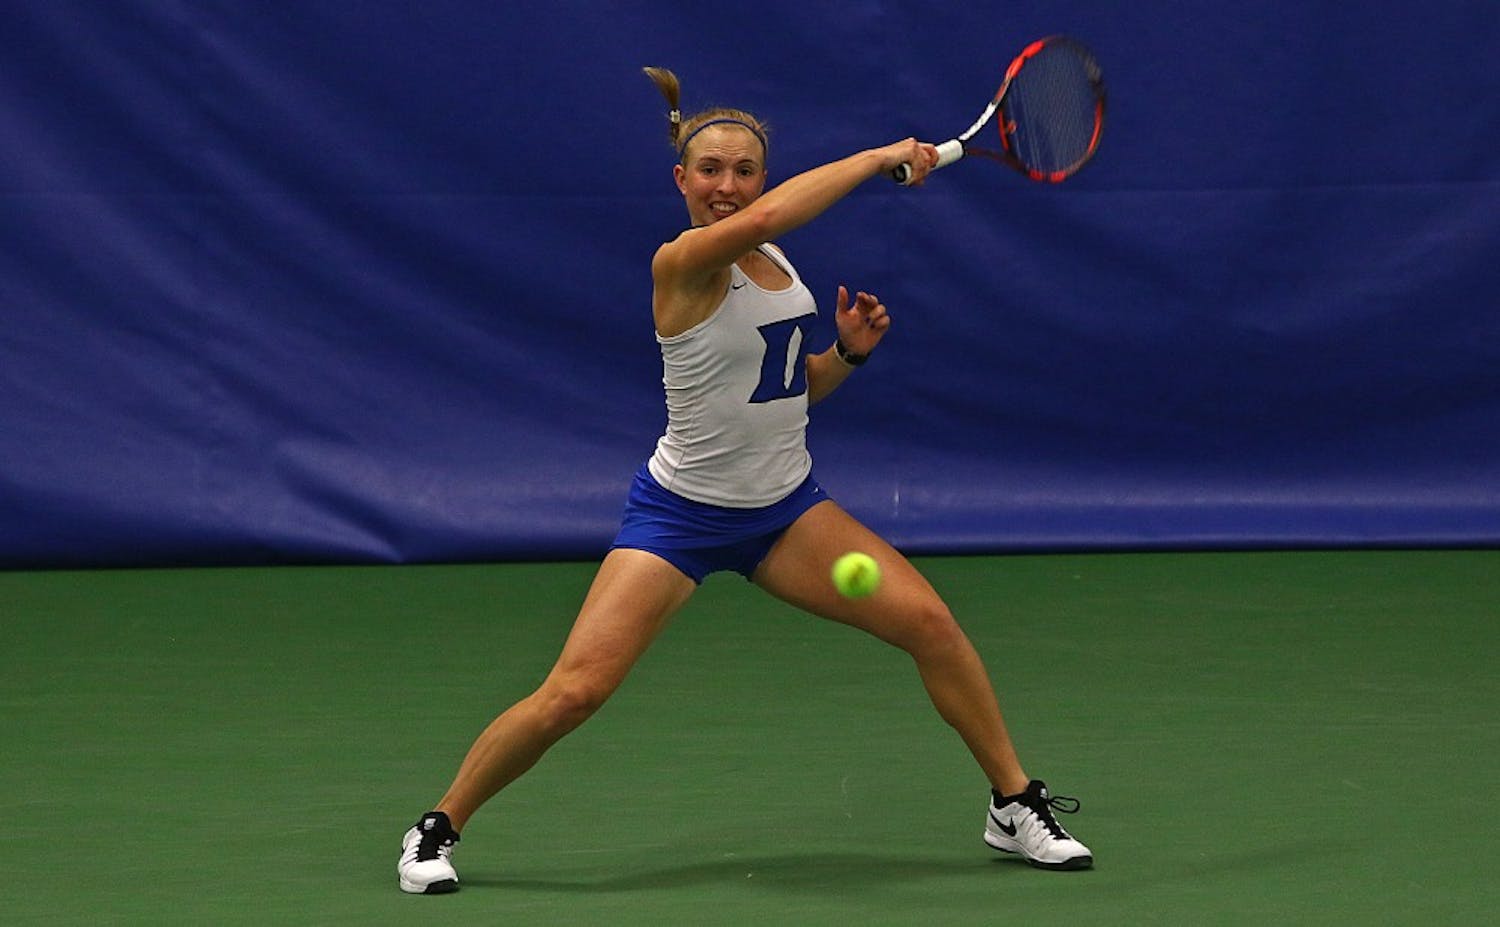 With senior Beatrice Capra unable to play on Senior Day due to illness, freshman Ellyse Hamlin stepped up and clinched a Duke win for the second straight match Tuesday.